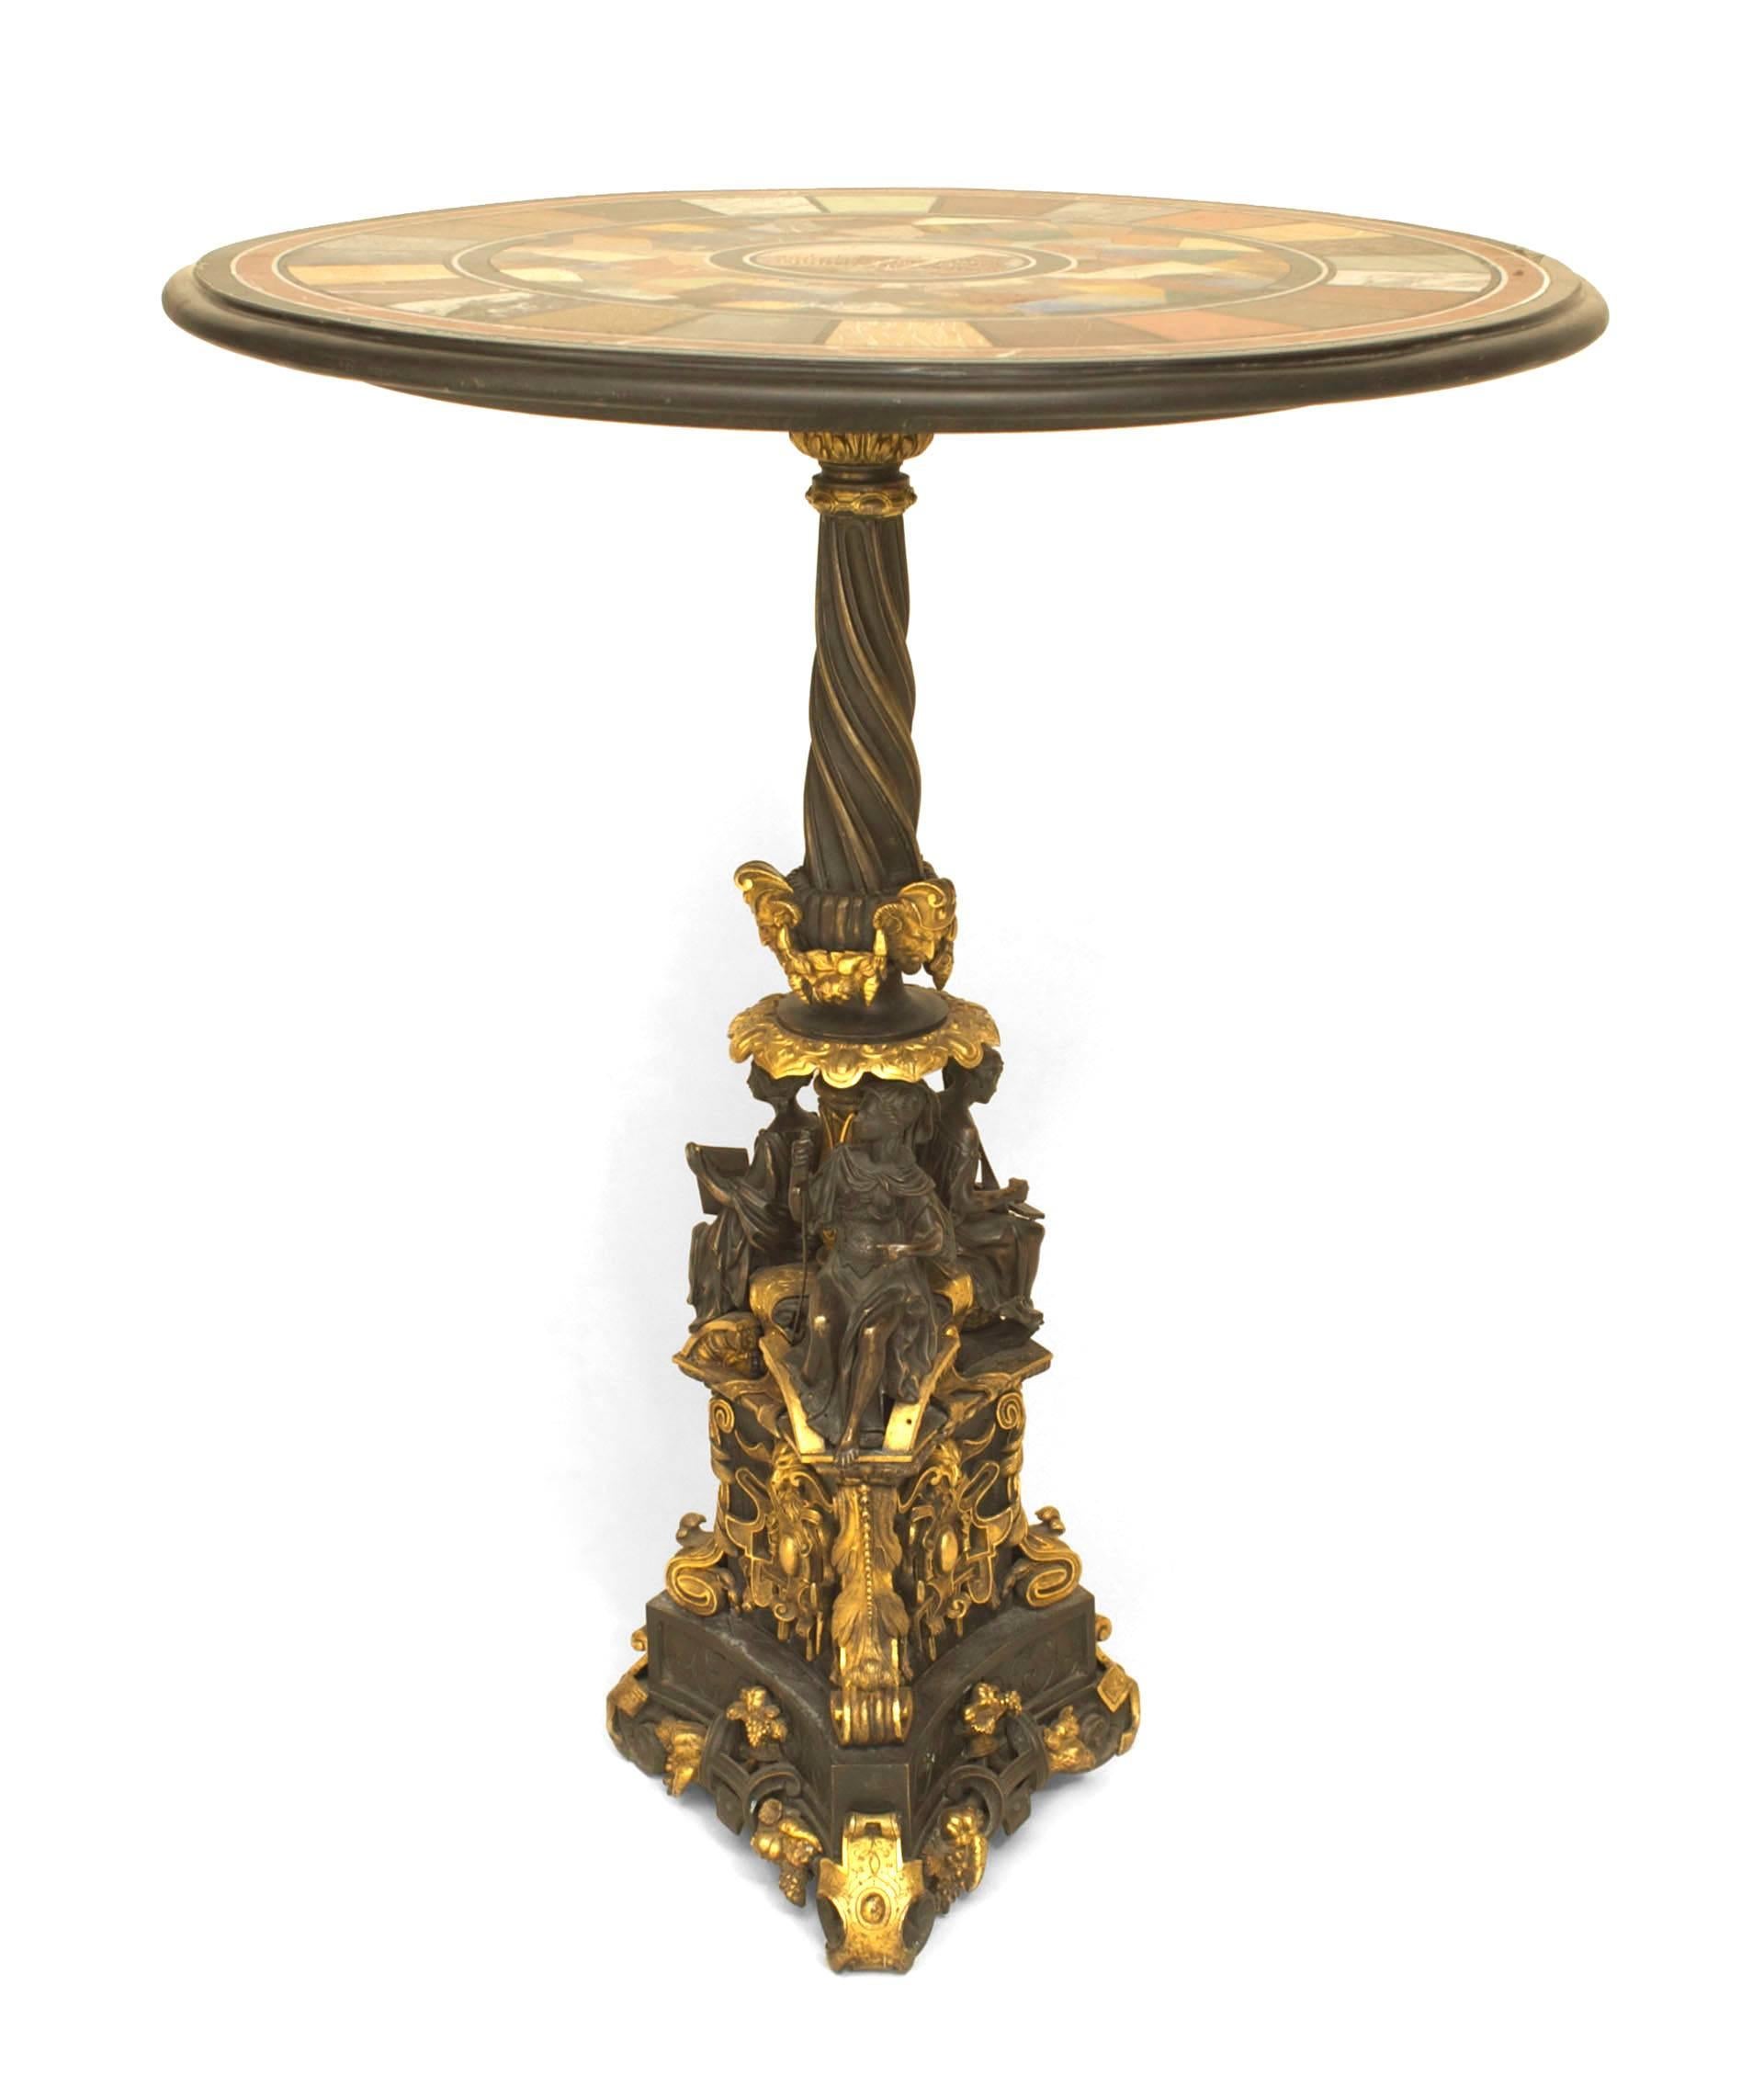 Italian Neo-classic (Late 19th Century) round specimen marble and micro-mosaic centered top on a Renaissance Revival triangular shaped parcel gilt & patinated bronze base with figures an floral design.
